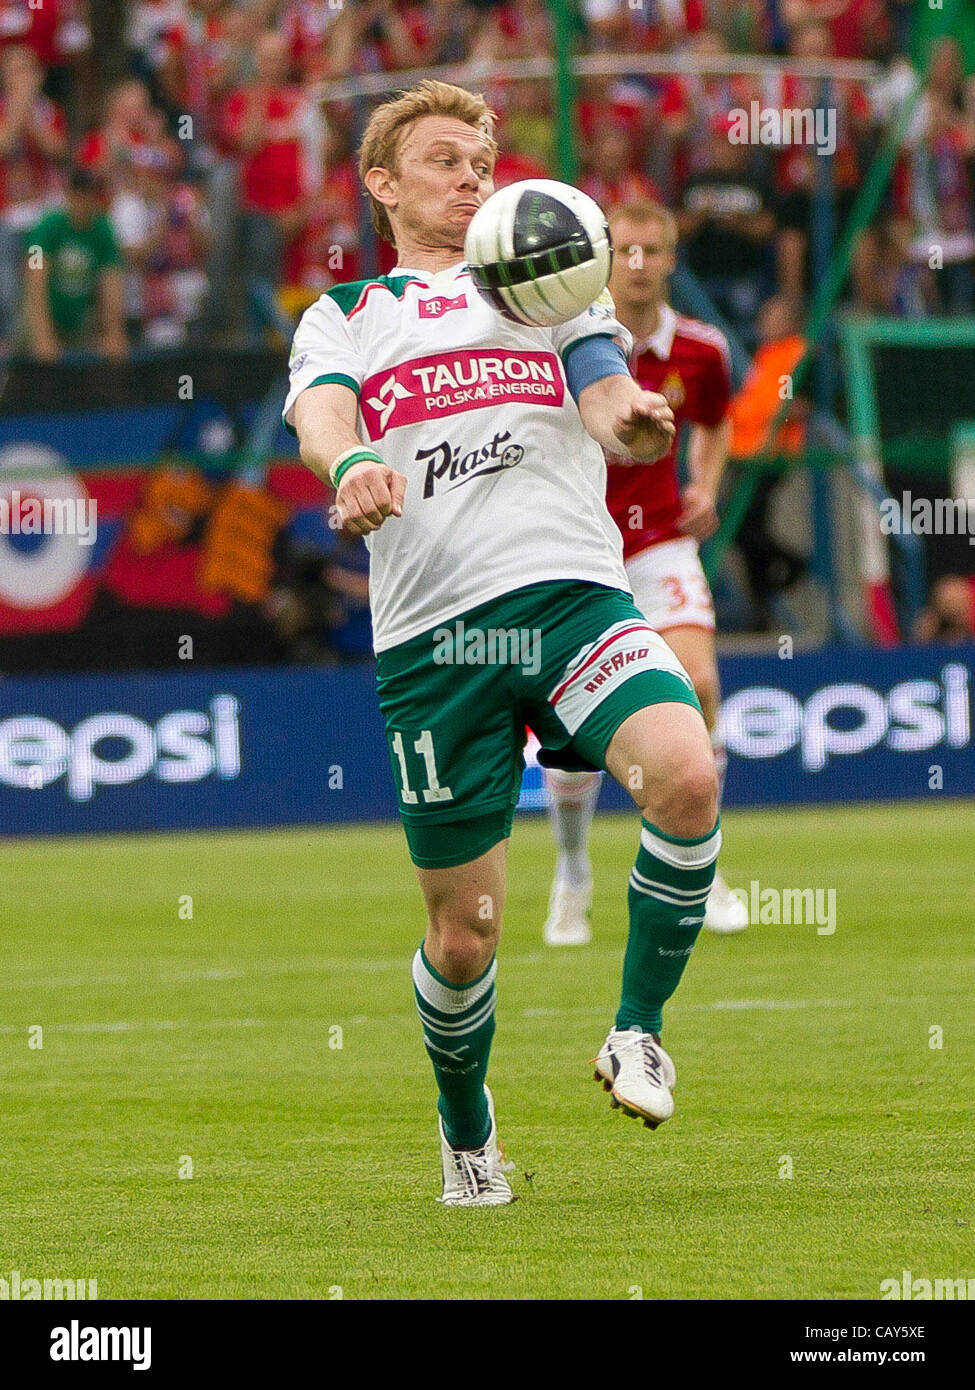 06.05.2012. Krakow, Poland.  T-Mobile Ekstraklasa League Wisla Krakow versus WKS Slask Wroclaw. SEBASTIAN MILA SLASK. WKS won the game by a score of 1-0 and held on to win the Polish league for the first time for 34 years. Stock Photo